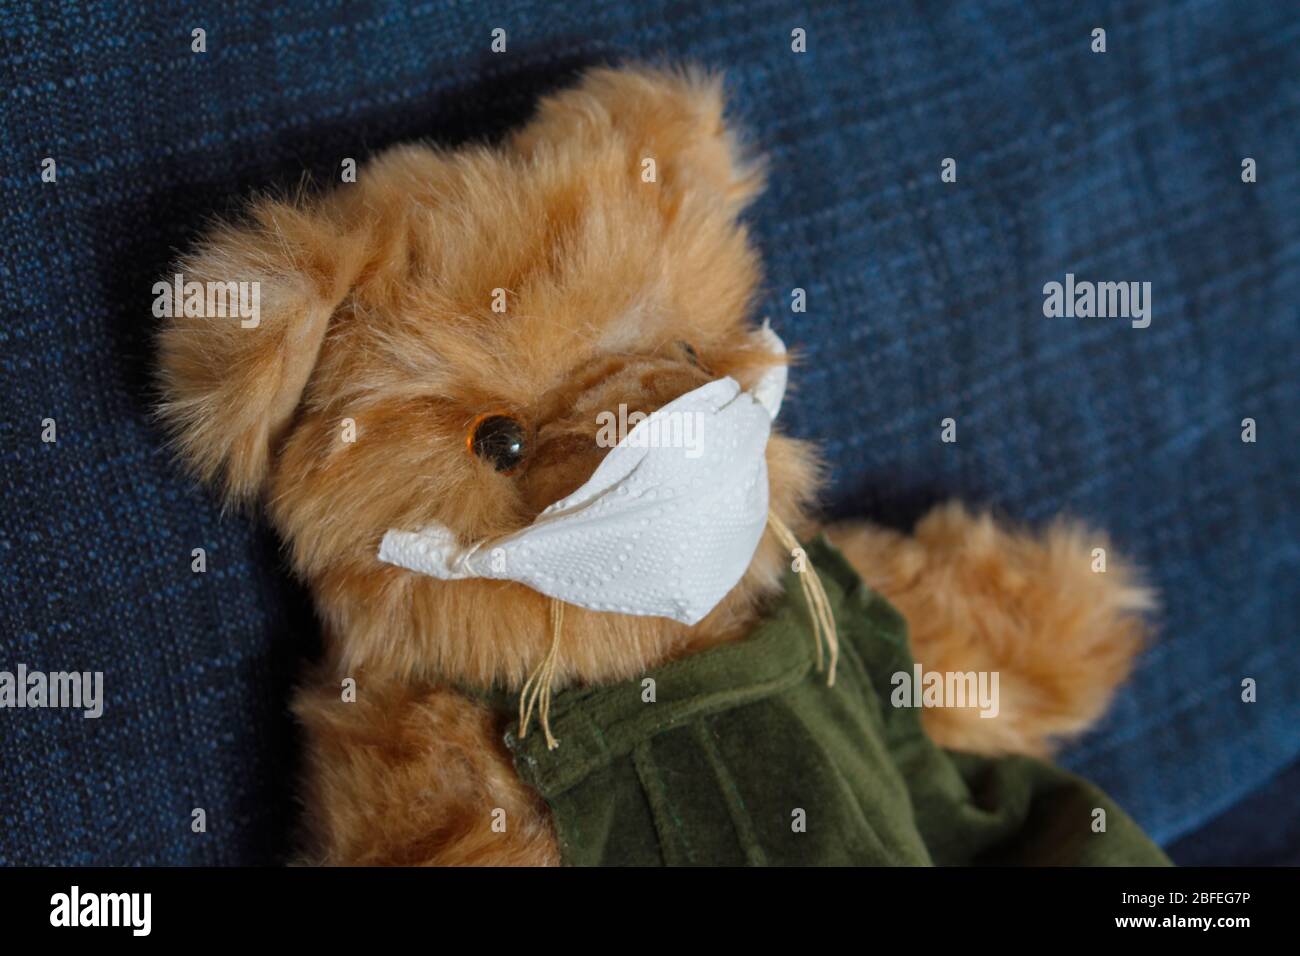 A furry teddy bear wearing a protective face mask is sitting on a blue sofa. Stock Photo